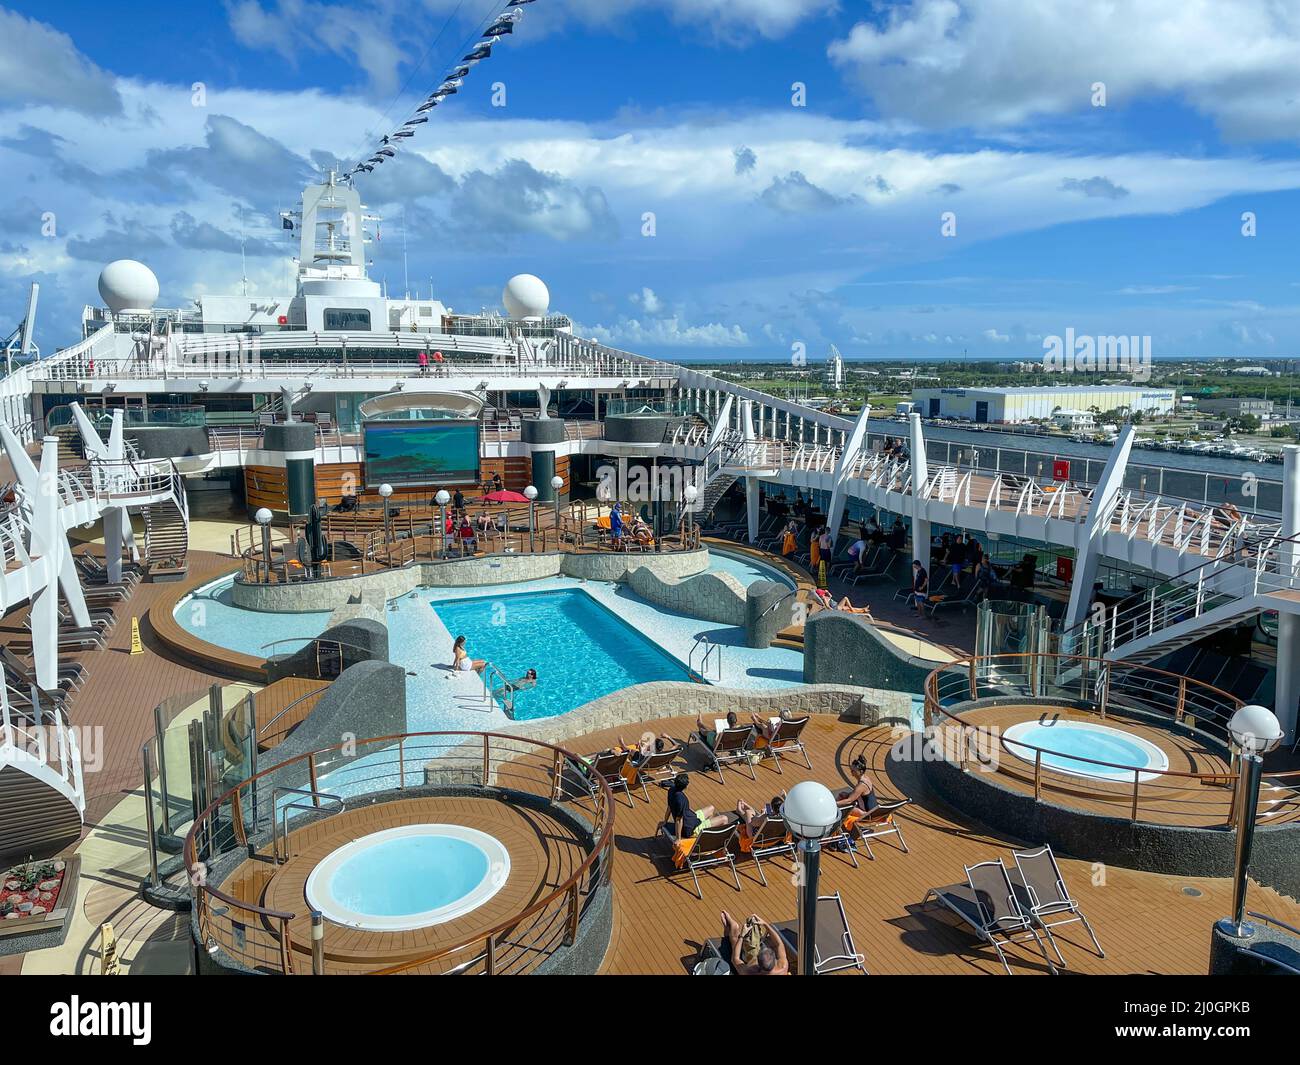 Orlando, FL USA - October 10, 2021:  The main swimming pool area on the MSC Cruise Ship Divina in Port Canaveral, Florida., Stock Photo